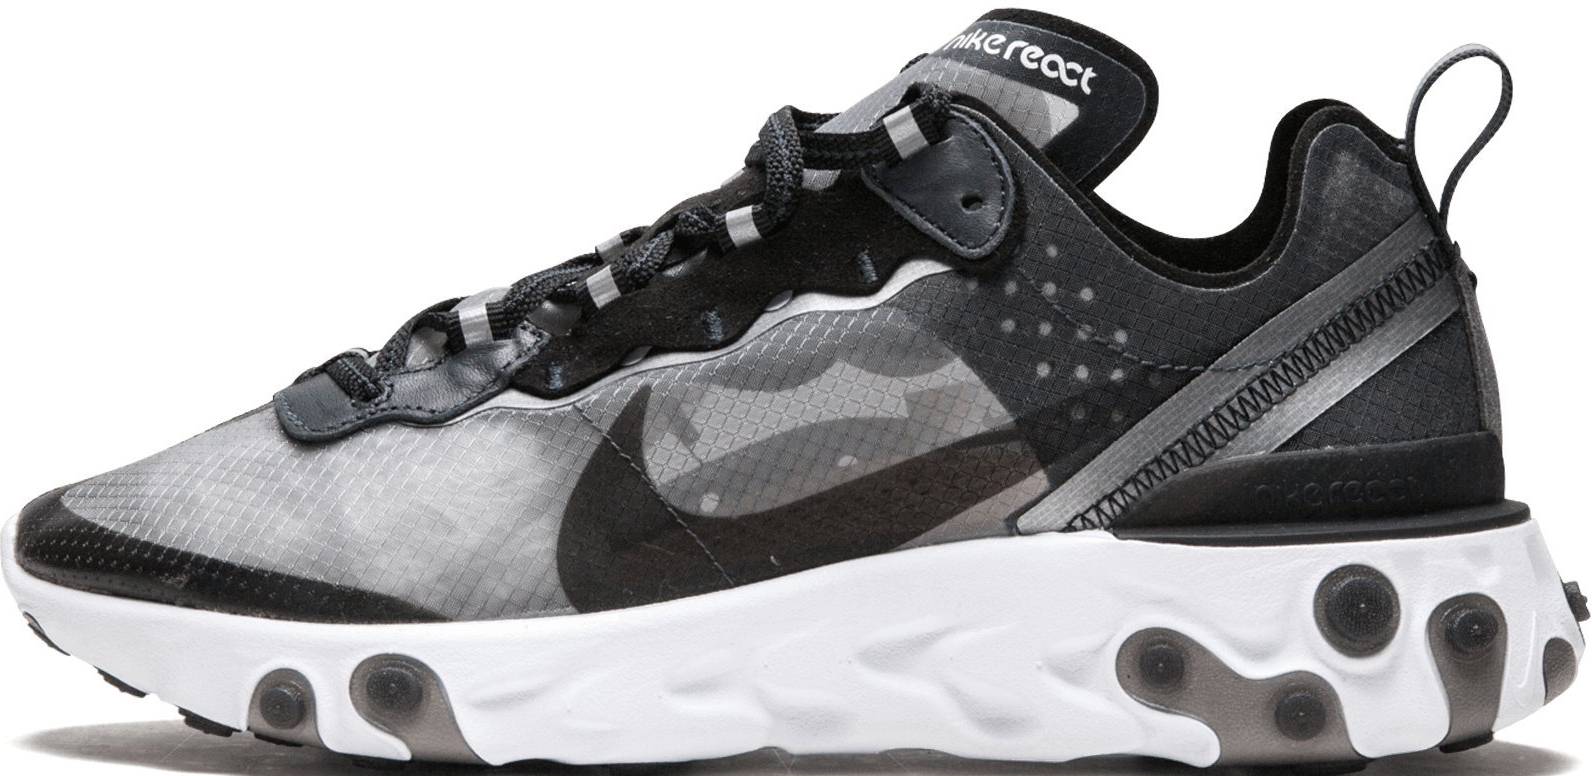 React Element 87 Review, Comparison, | nike shoes sandals boots clearance, Infrastructure-intelligenceShops